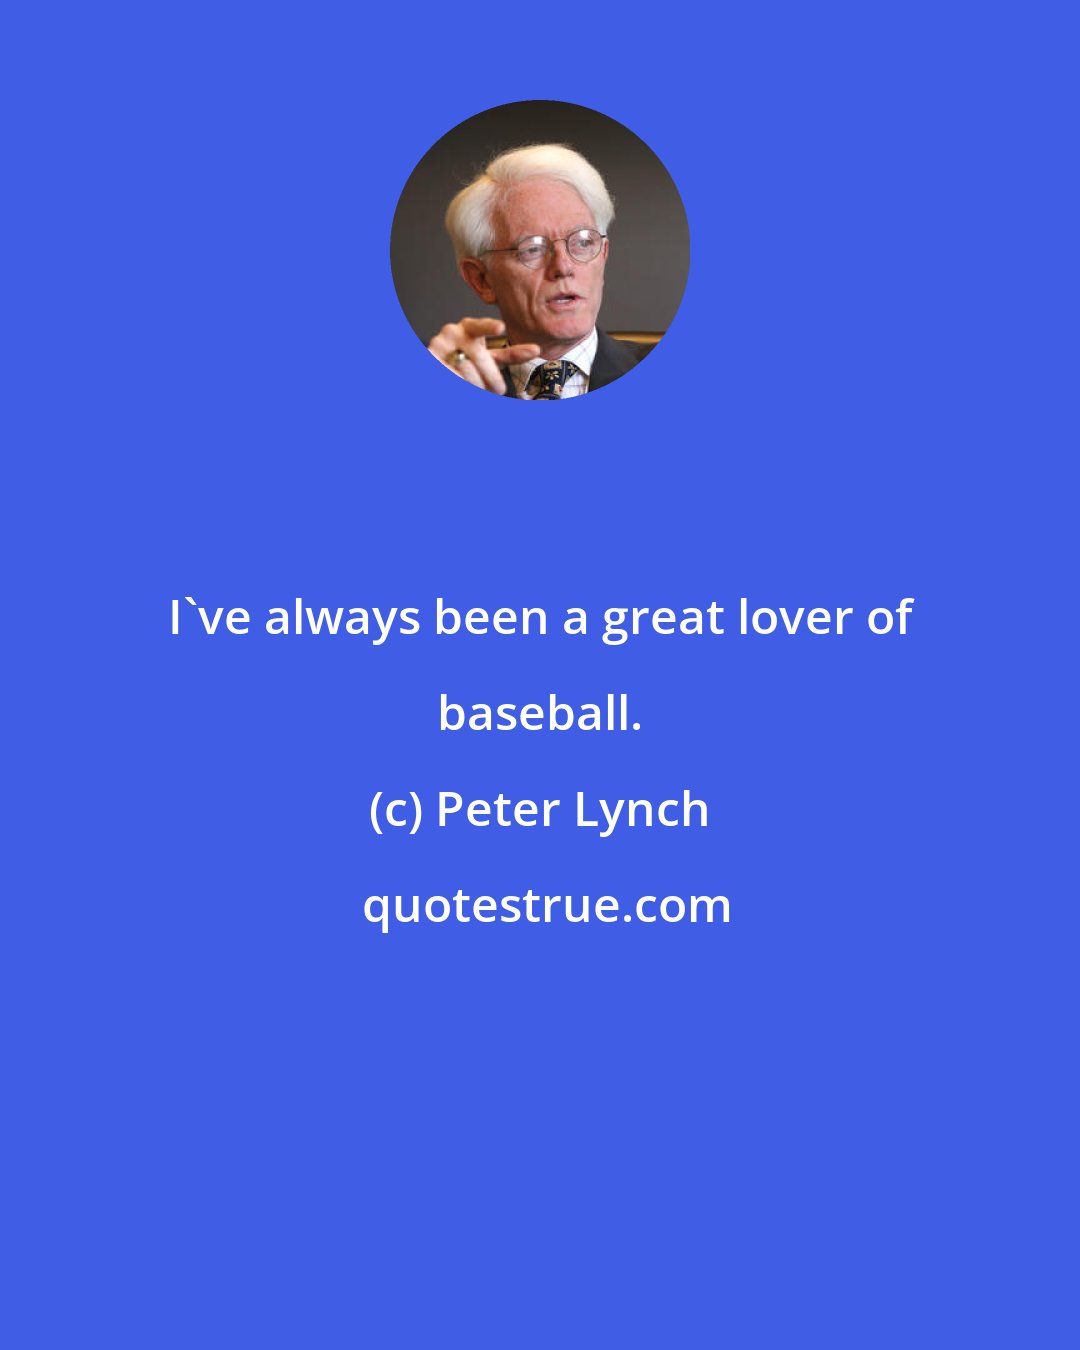 Peter Lynch: I've always been a great lover of baseball.